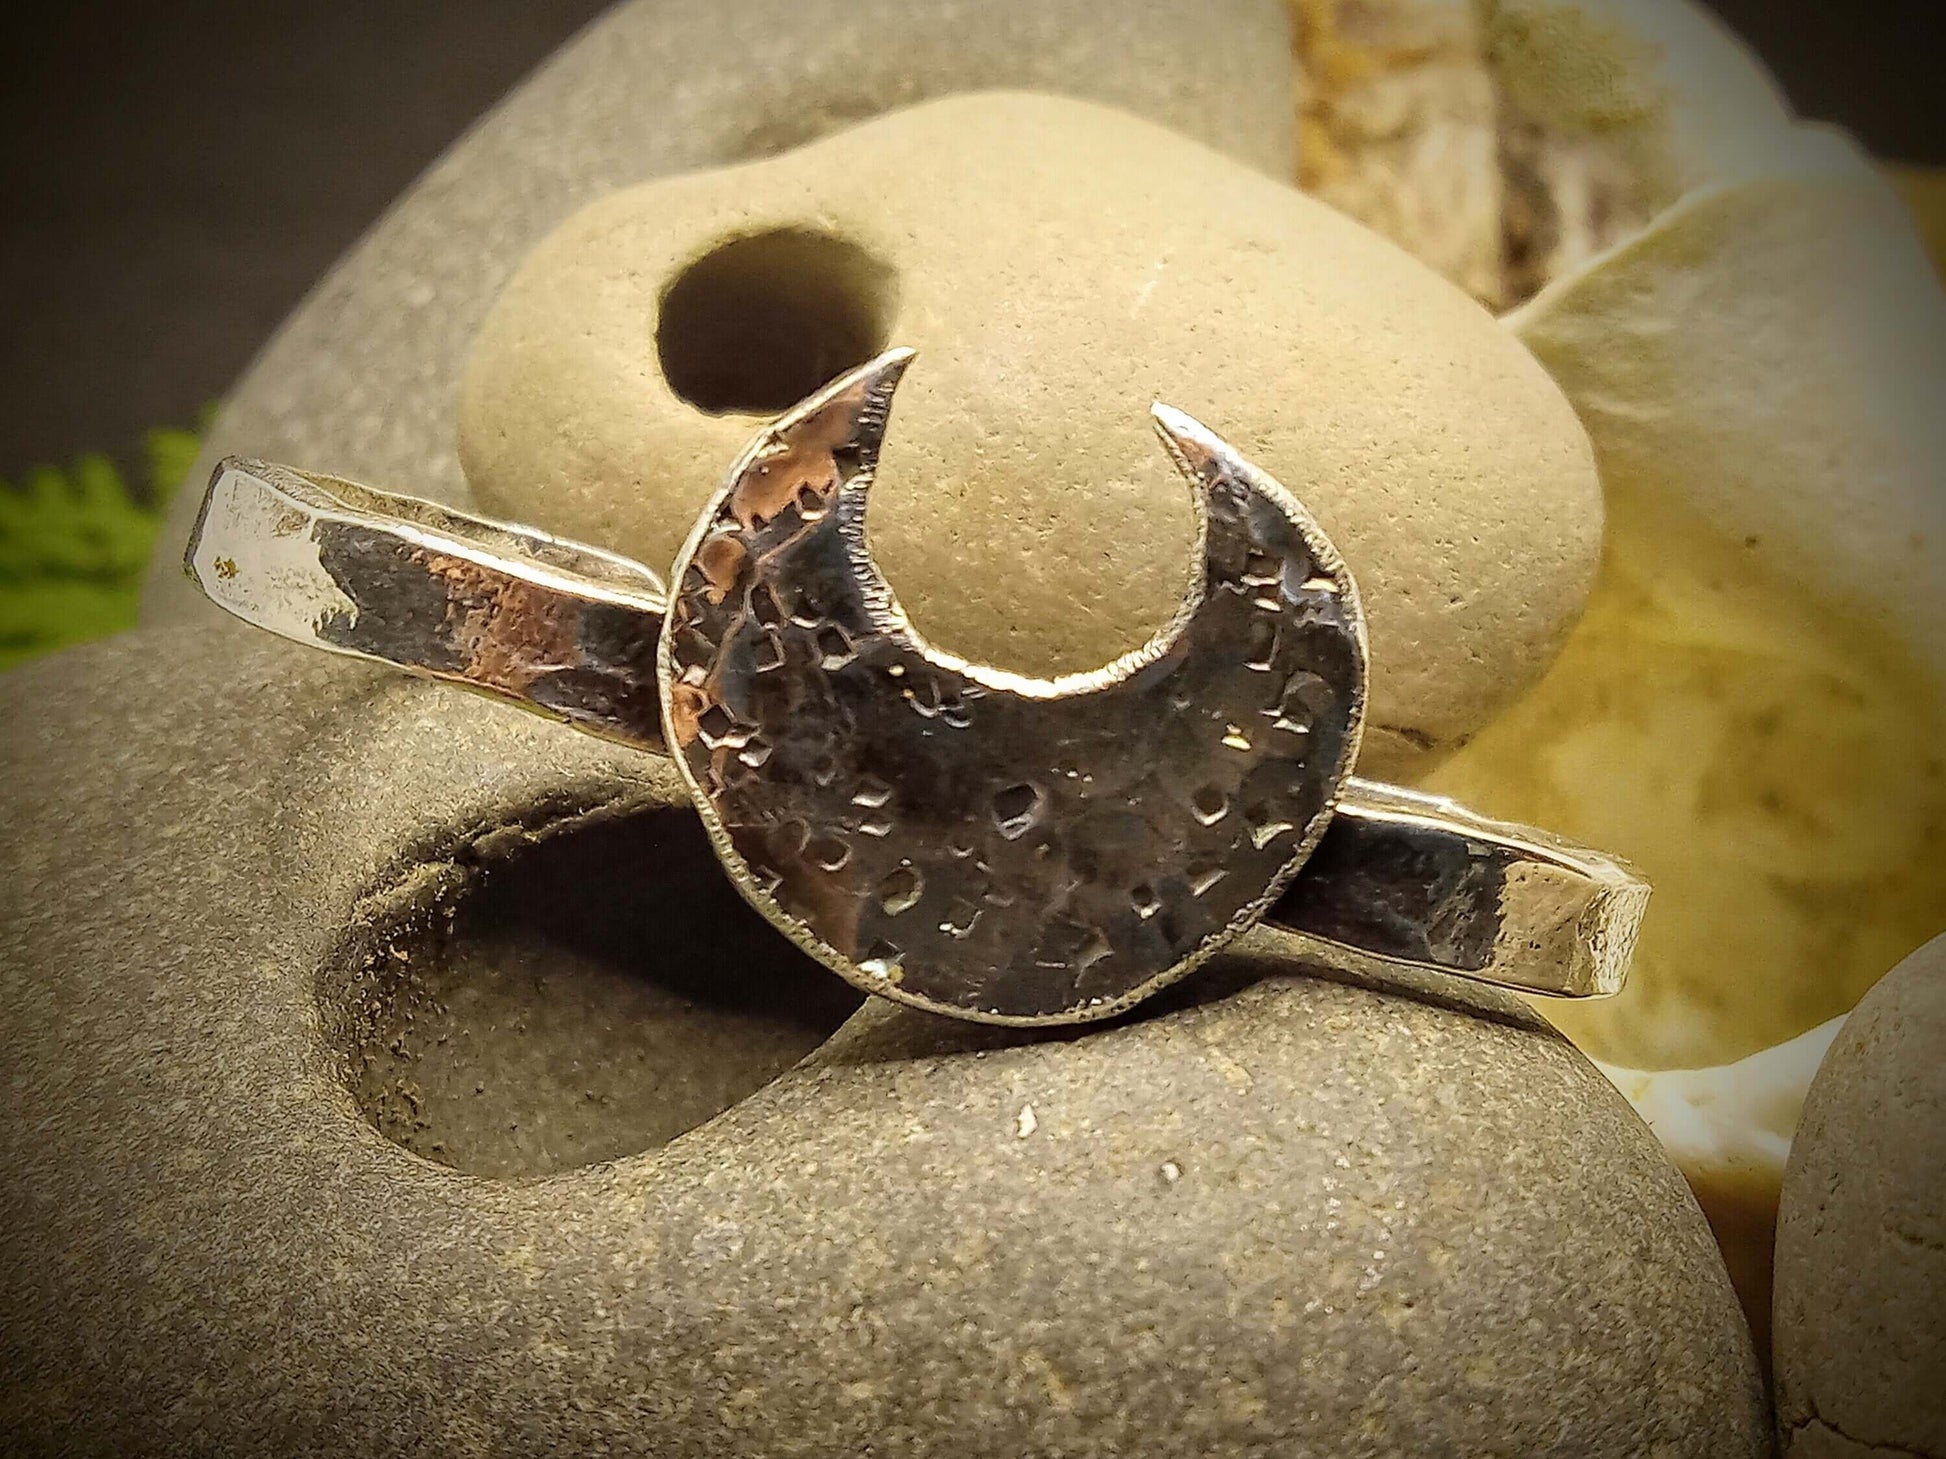 A silver double ring with a crescent moon that has hammered texturing rested next to a hagstone.